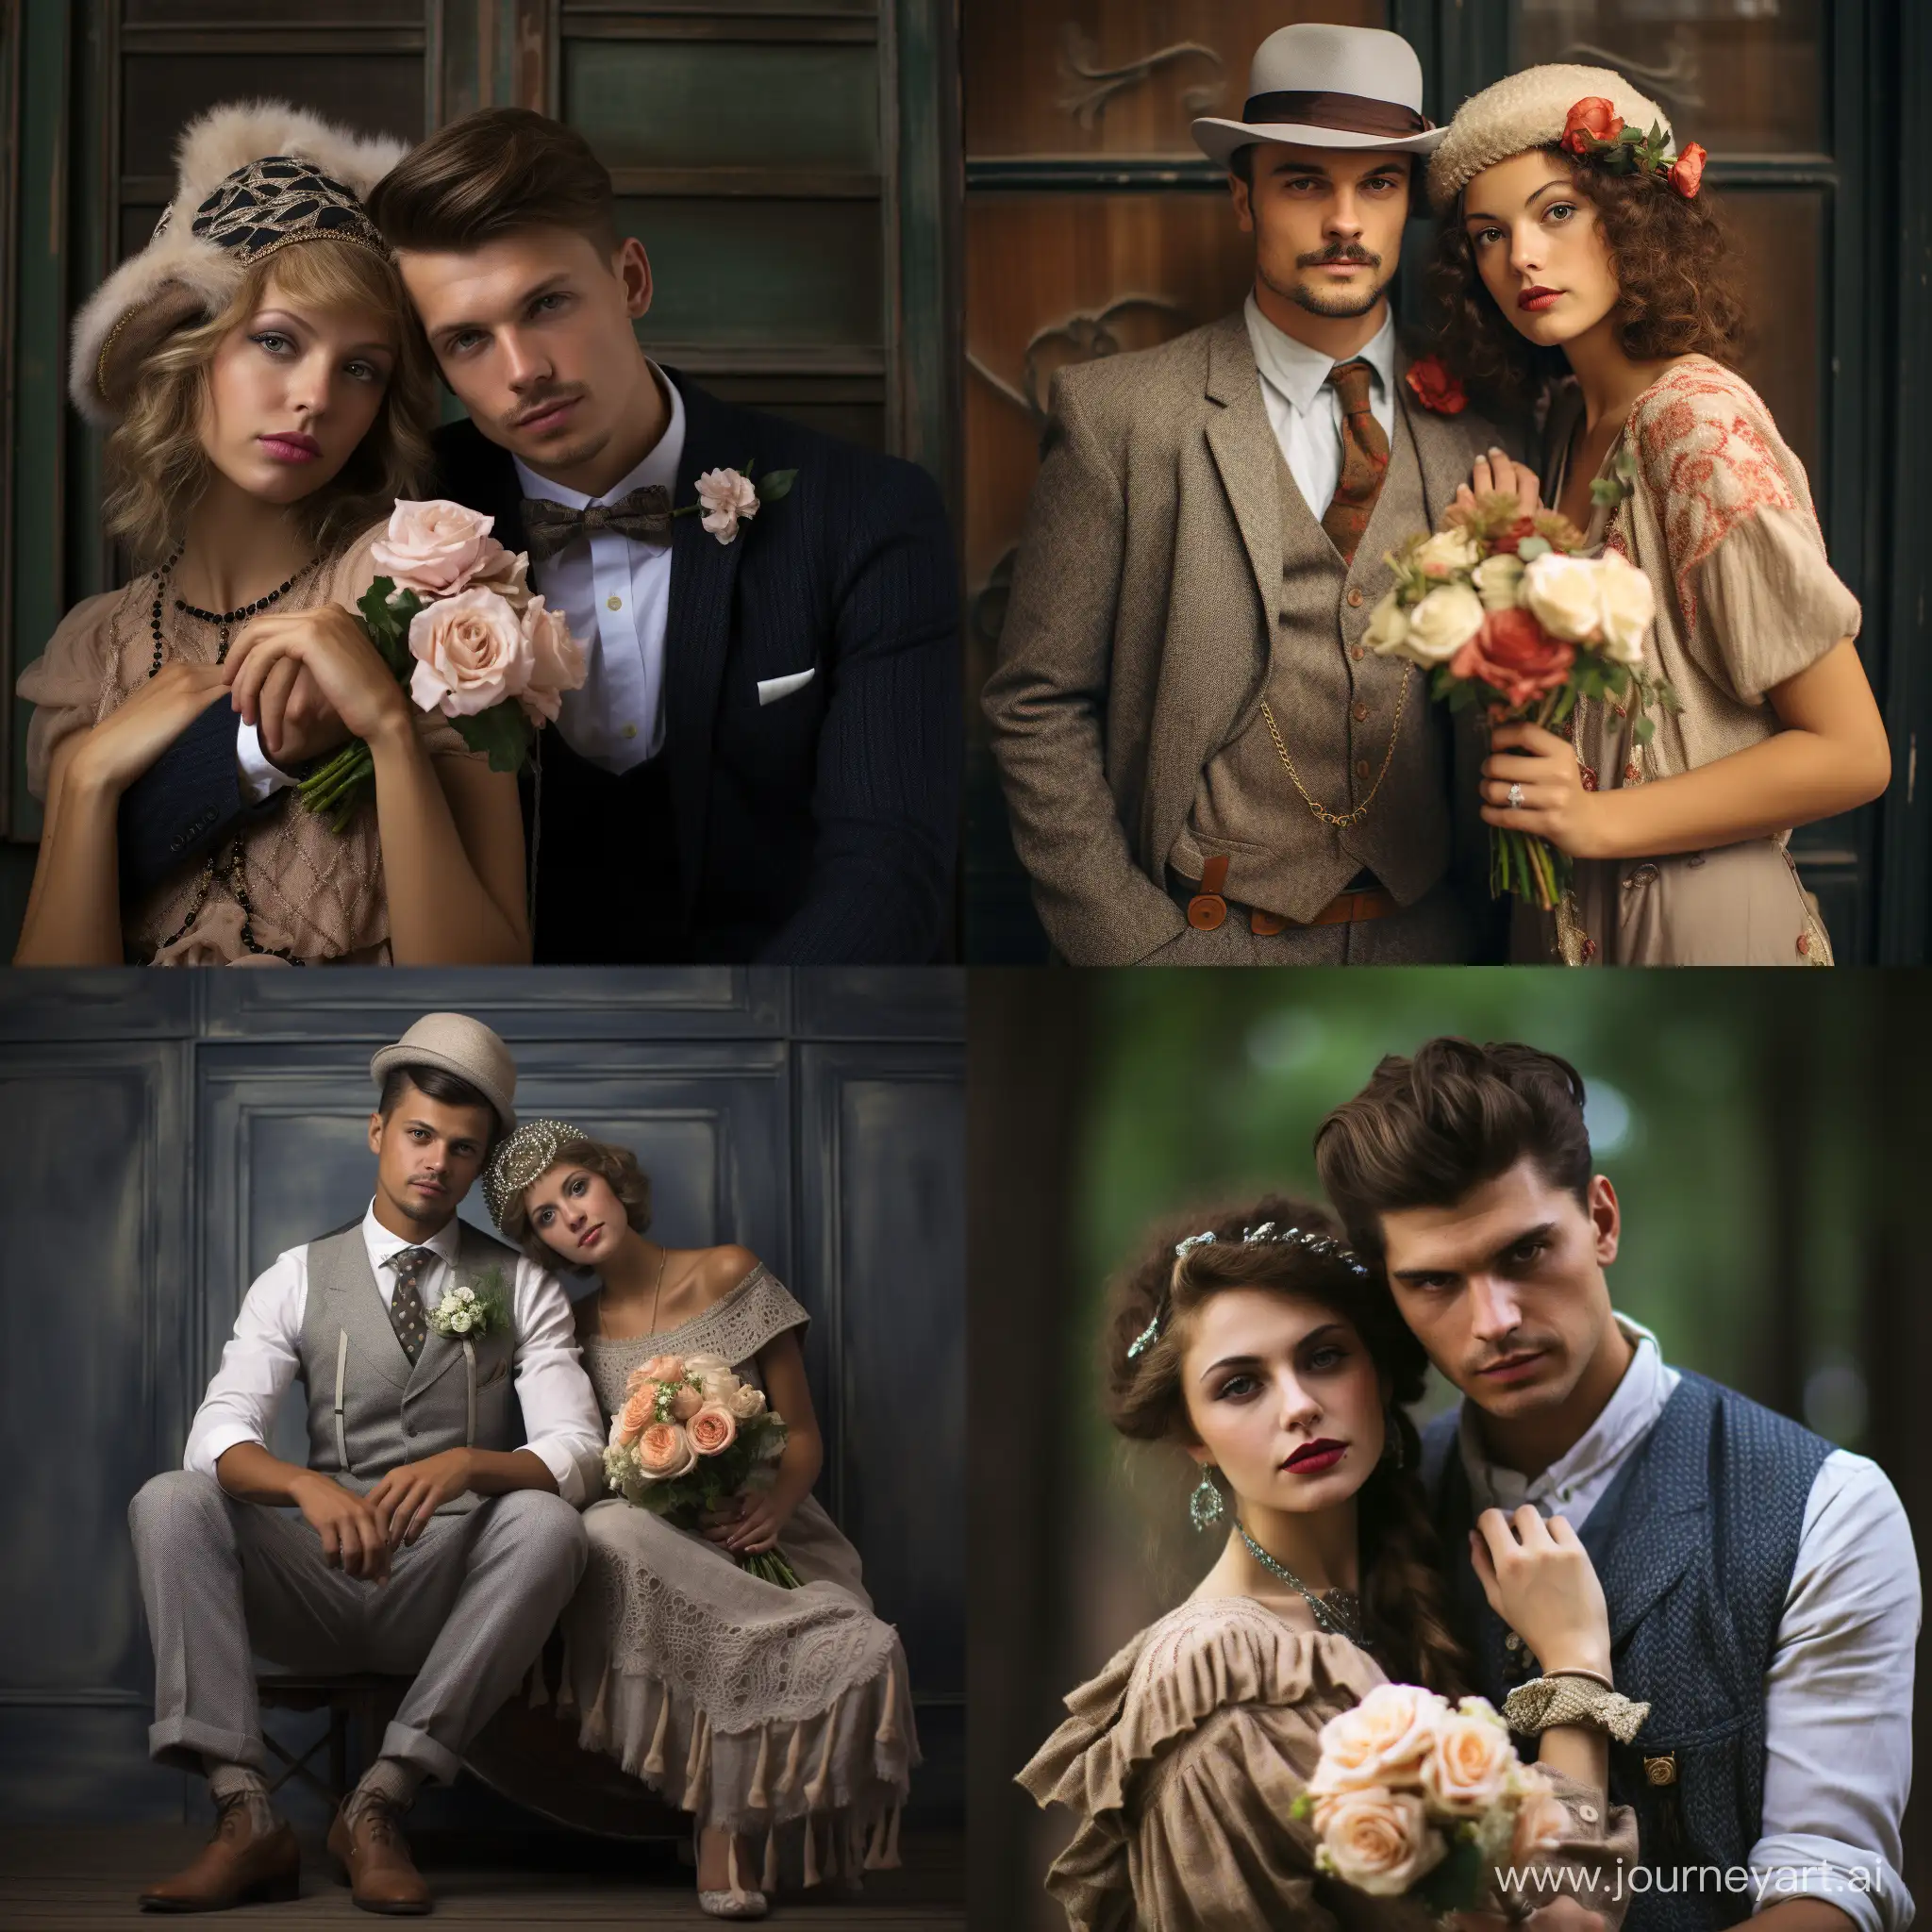 Bohemian-Elegance-1920s-Inspired-Young-French-Couple-in-Artistic-Harmony